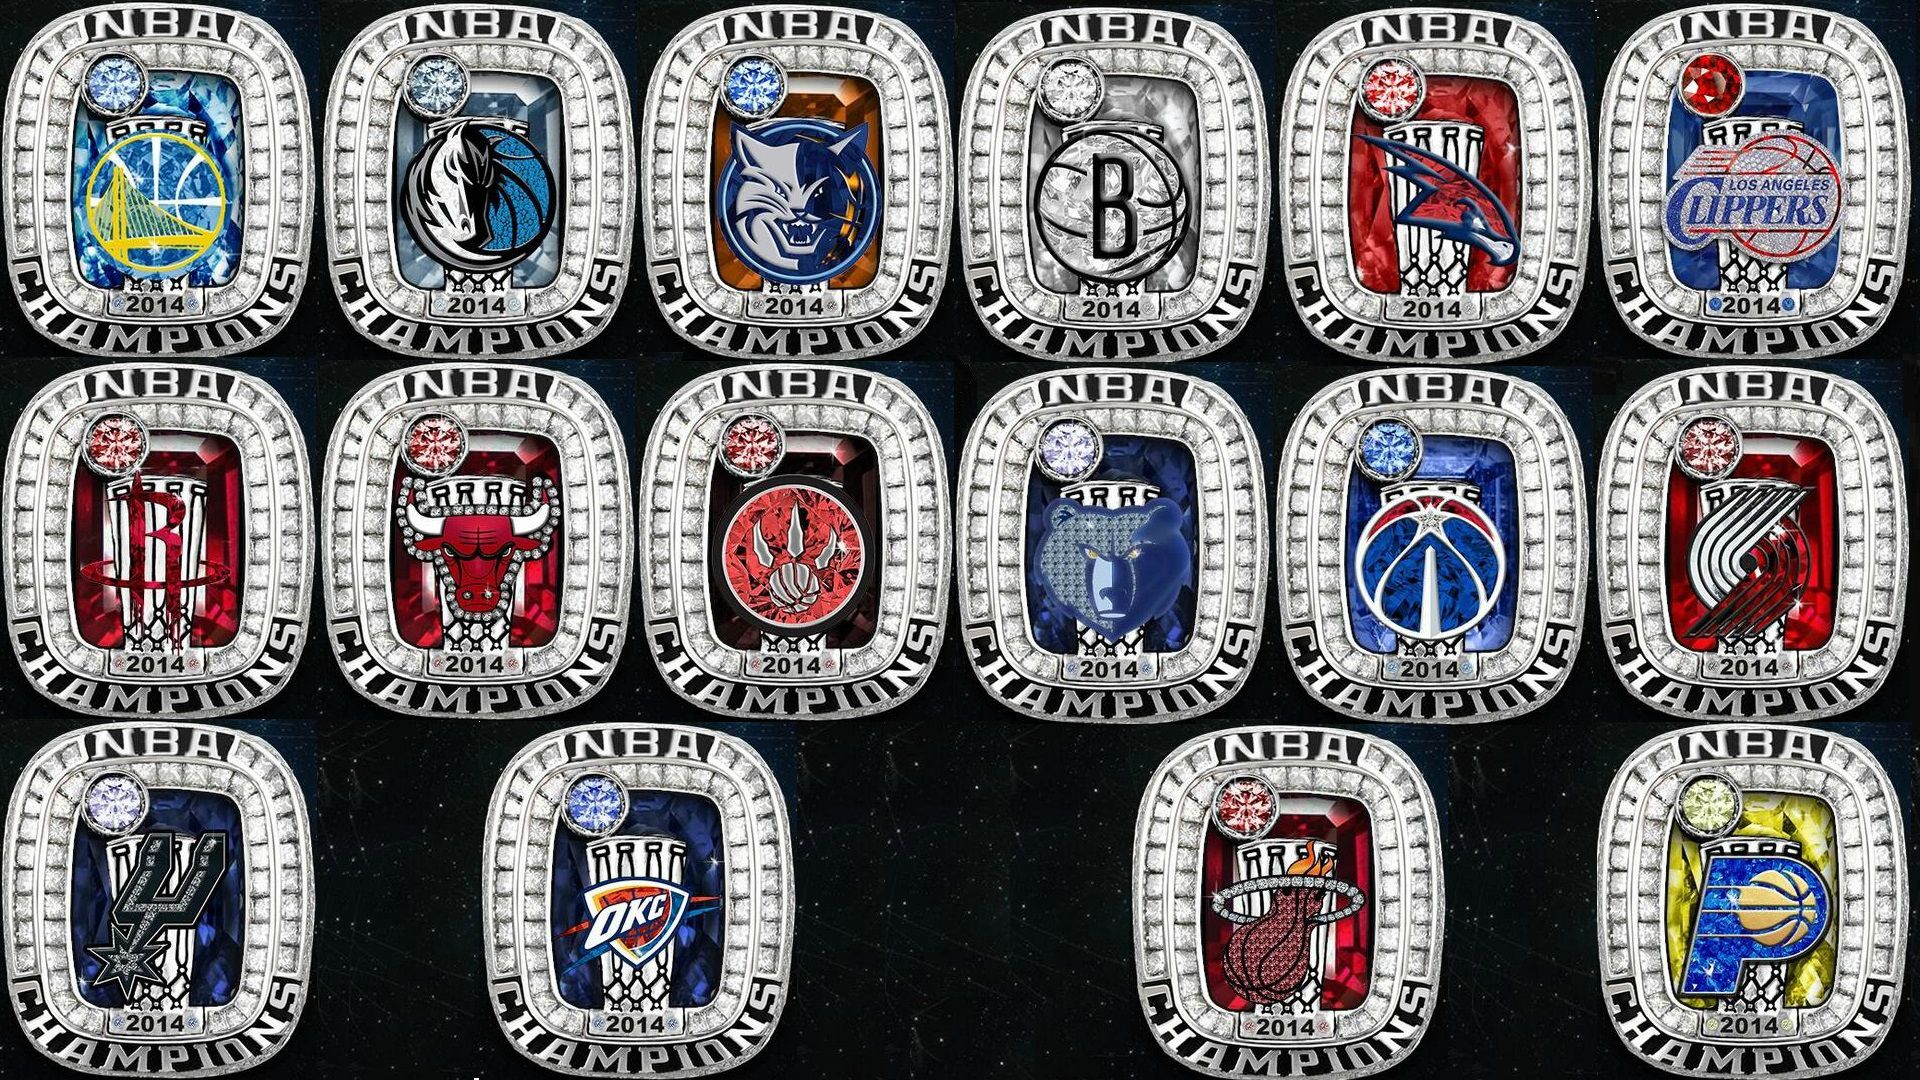 The Nba Tweeted Out Championship Rings For Each Team